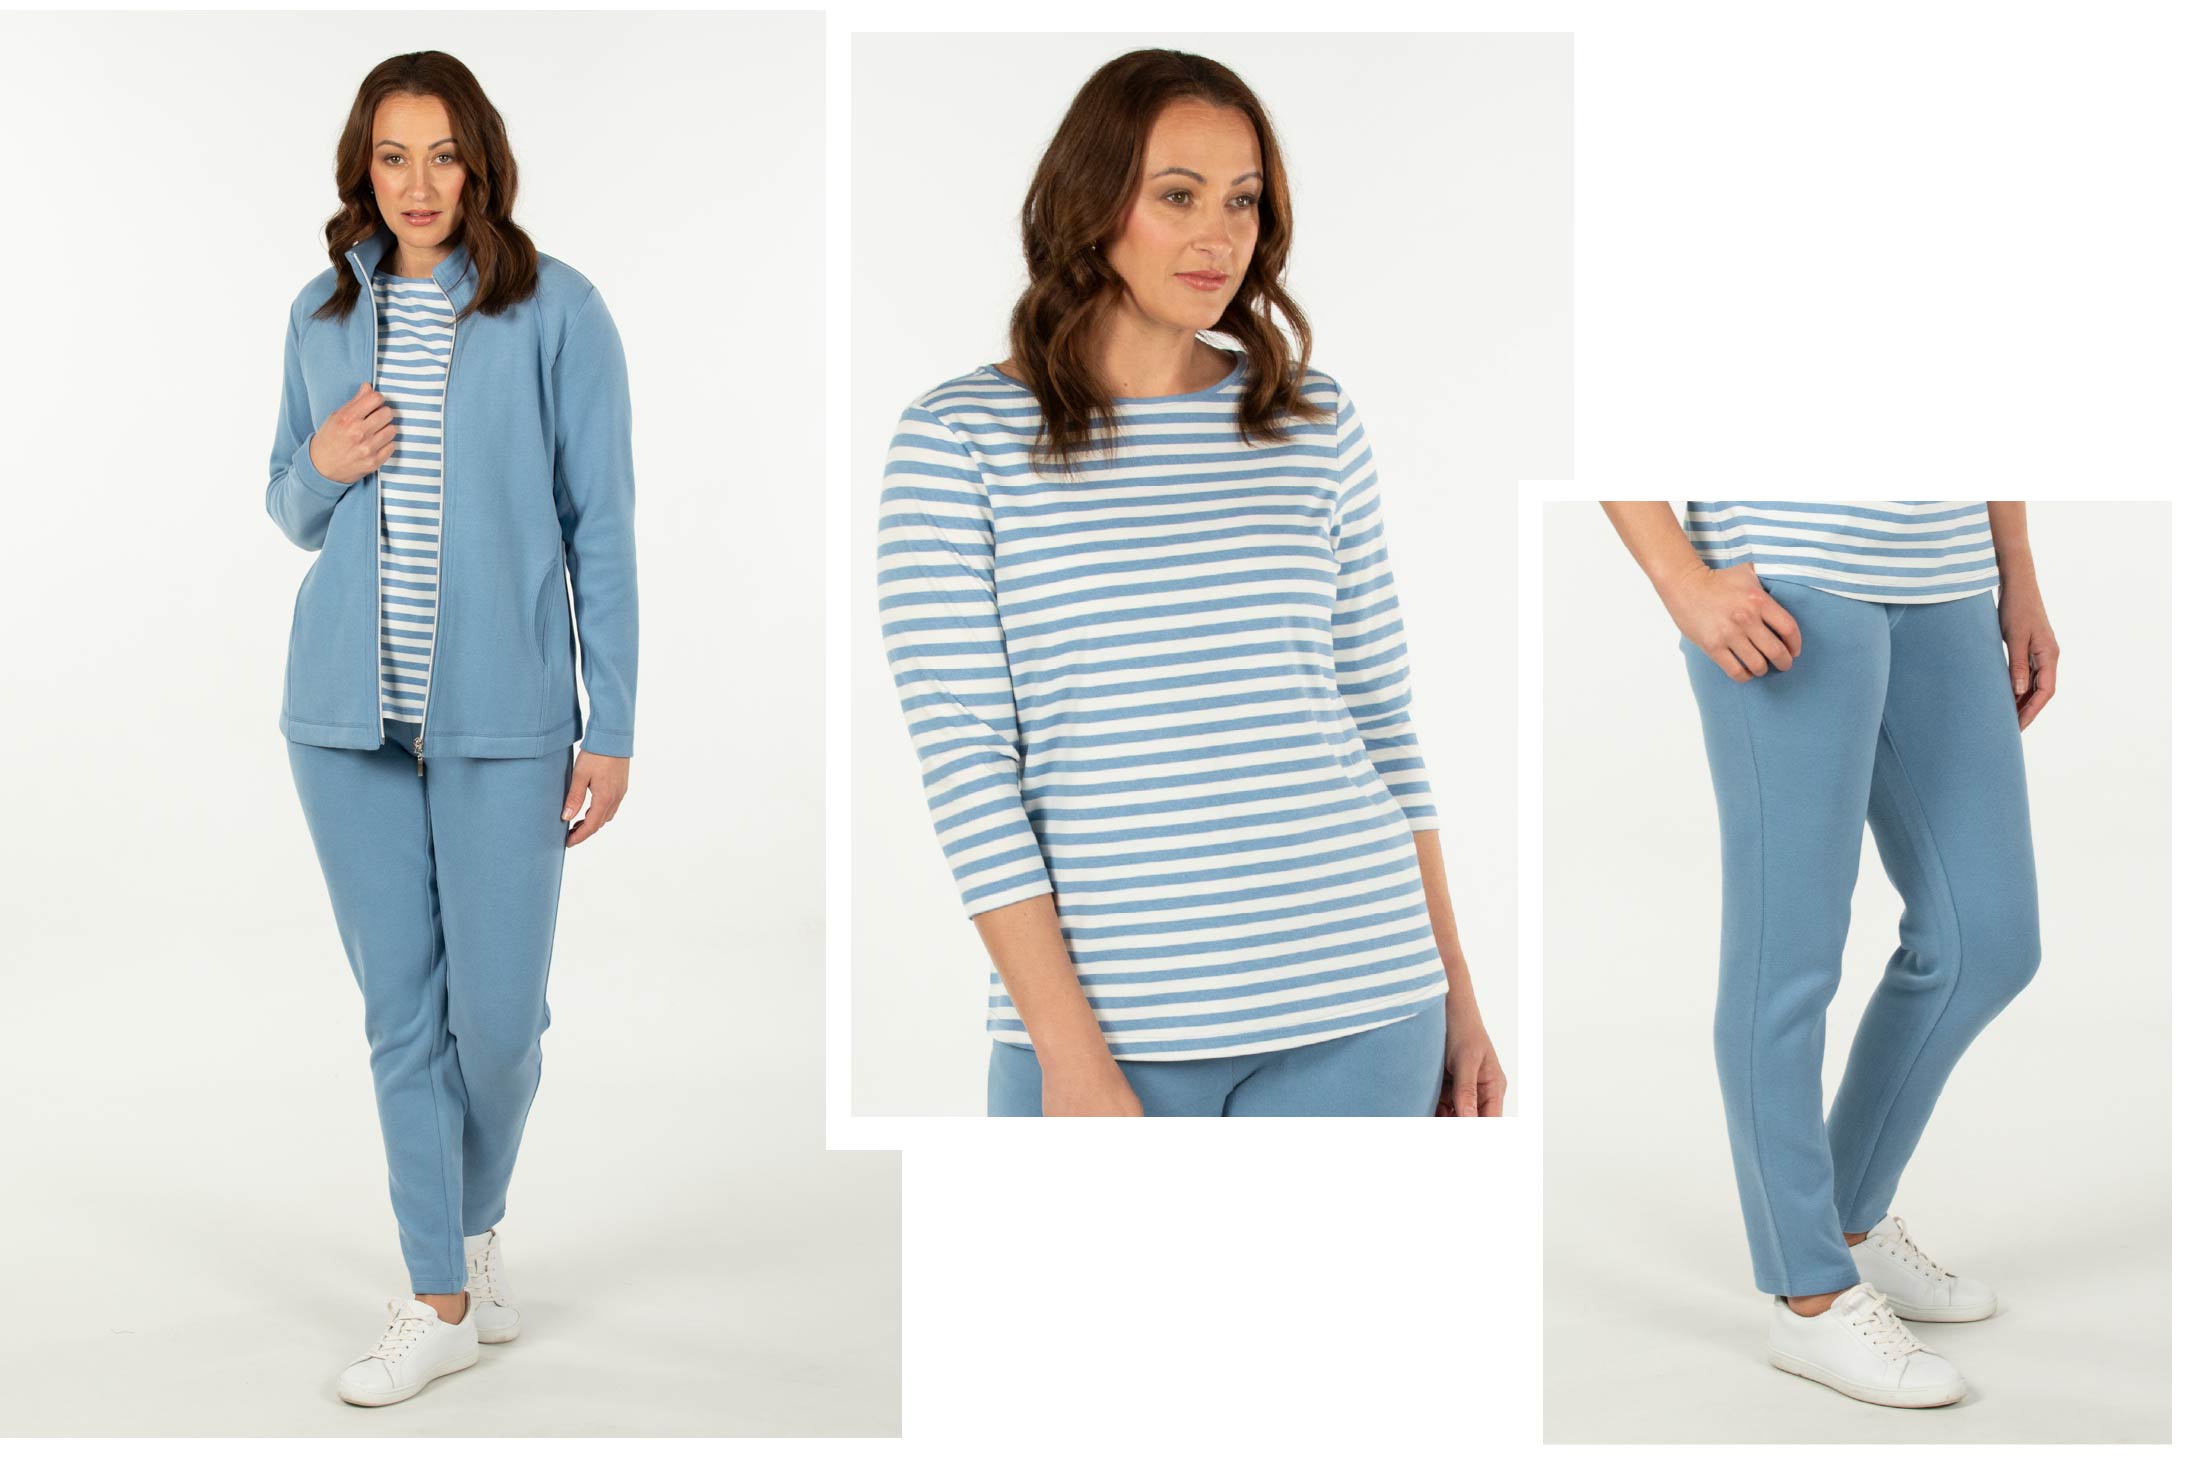 Leisurewear jacket and pant and stripe top in light blue